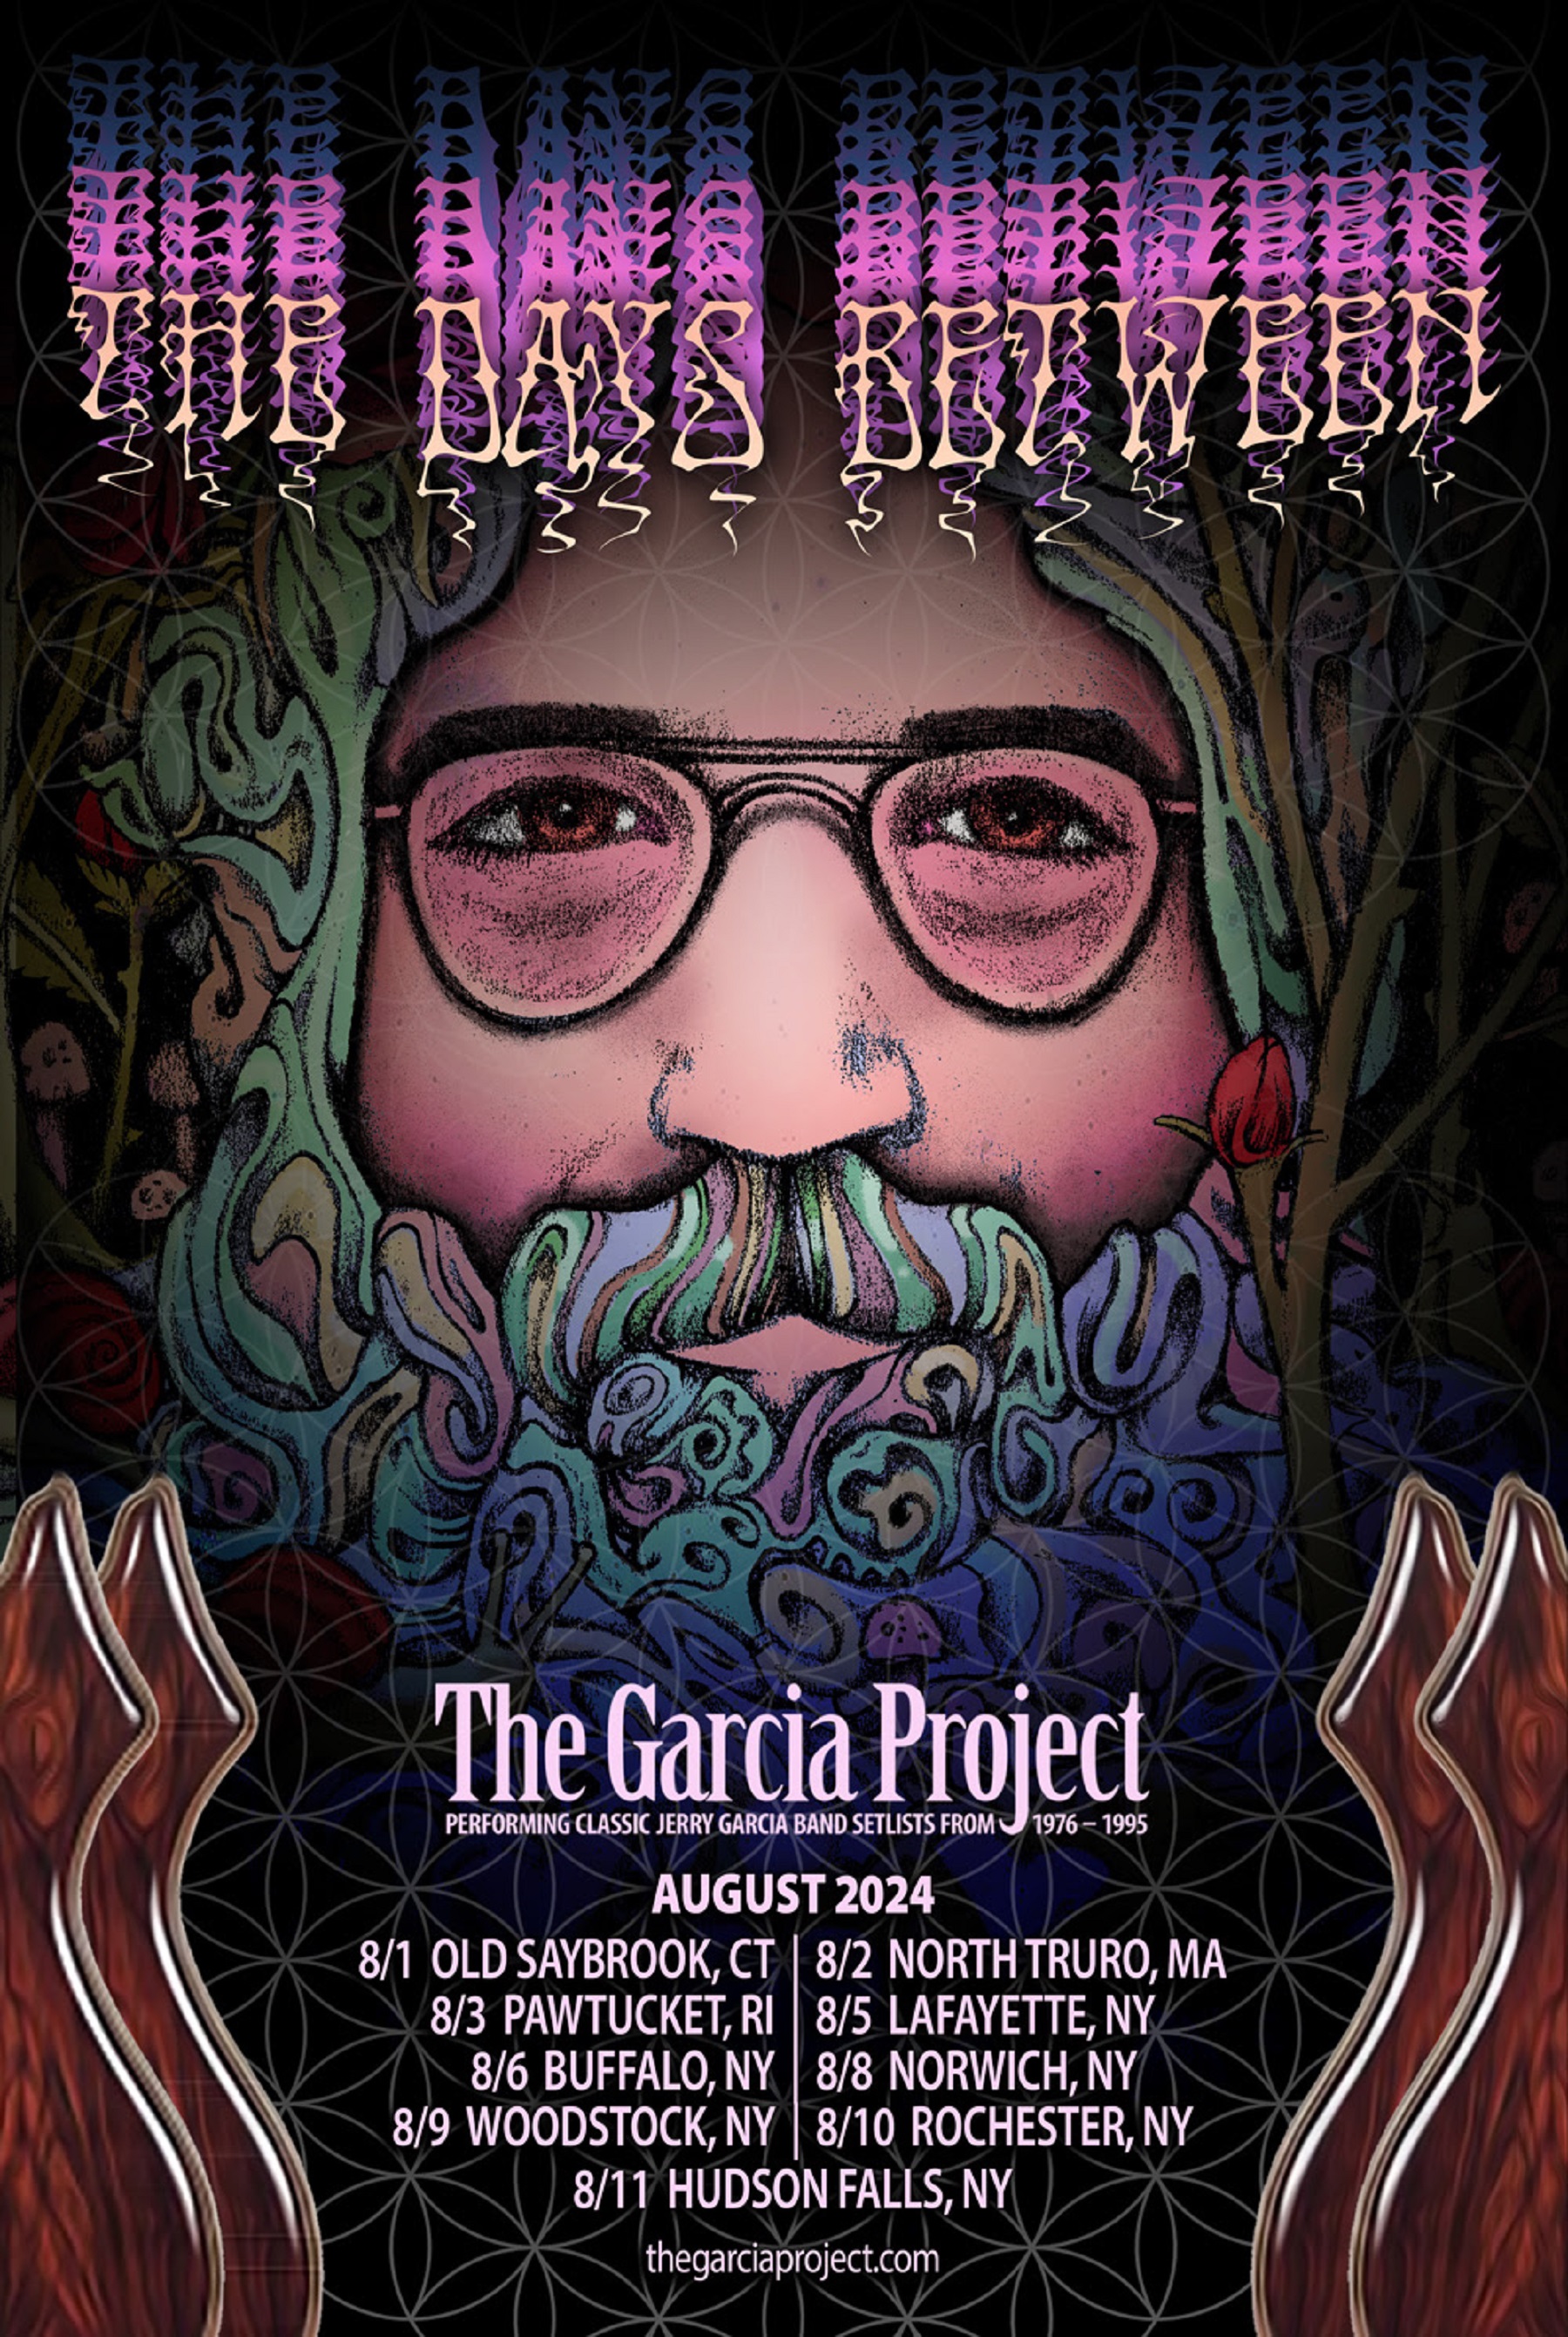 Celebrating The Days Between with The Garcia Project